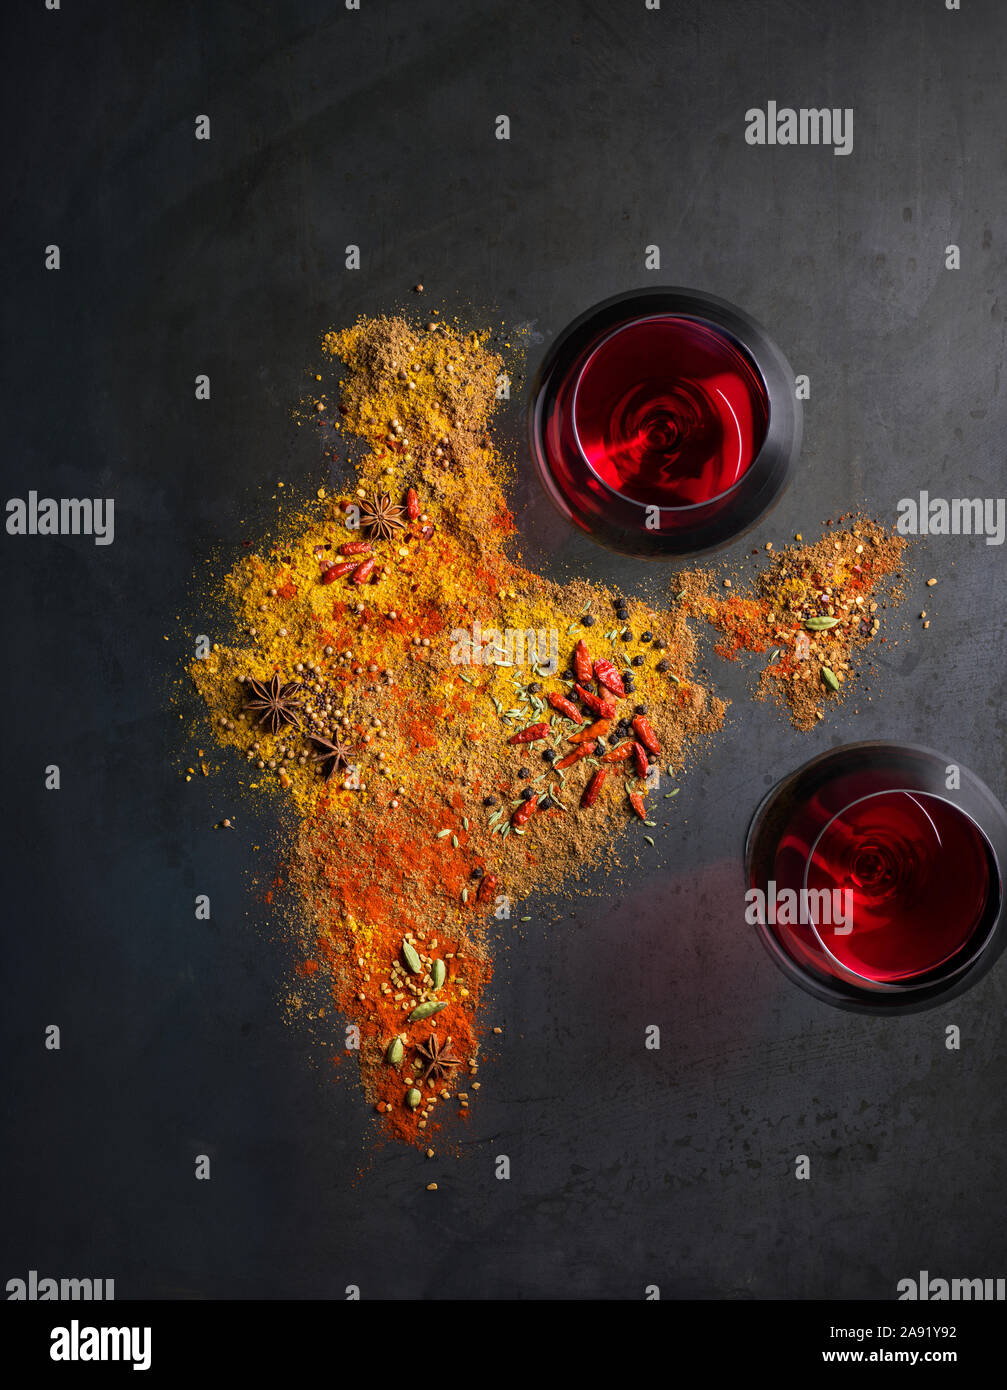 Spices and wineglasses on grey background Stock Photo